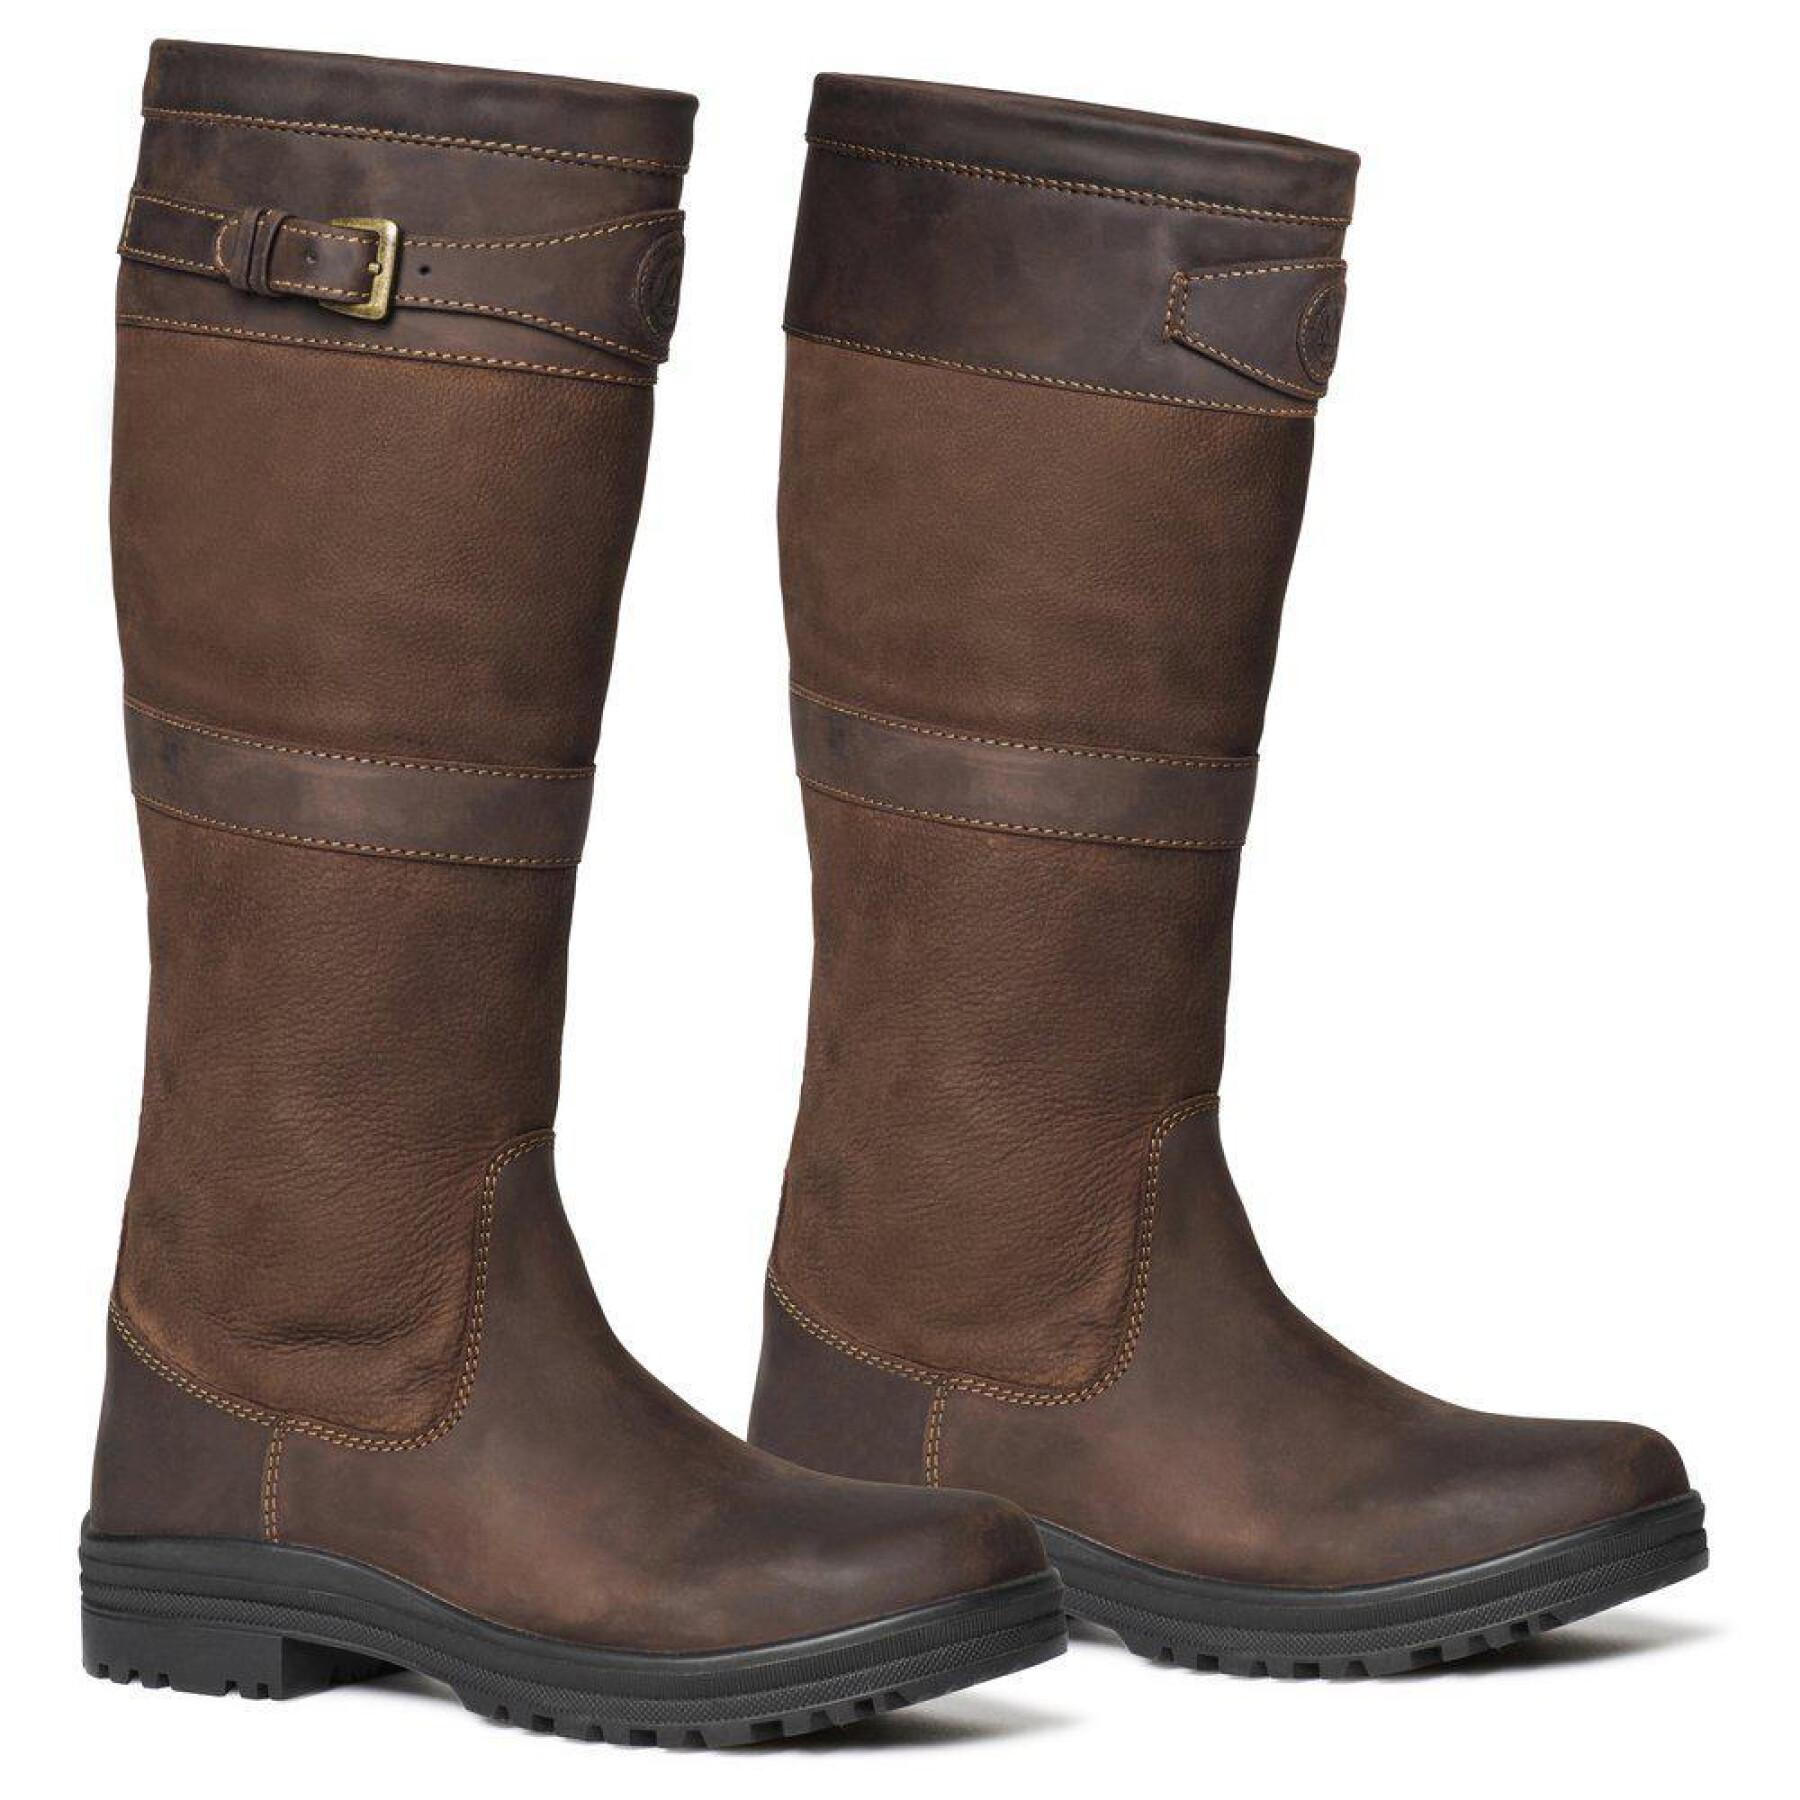 Women's leather riding boots Mountain Horse Cumberland Regular Wide